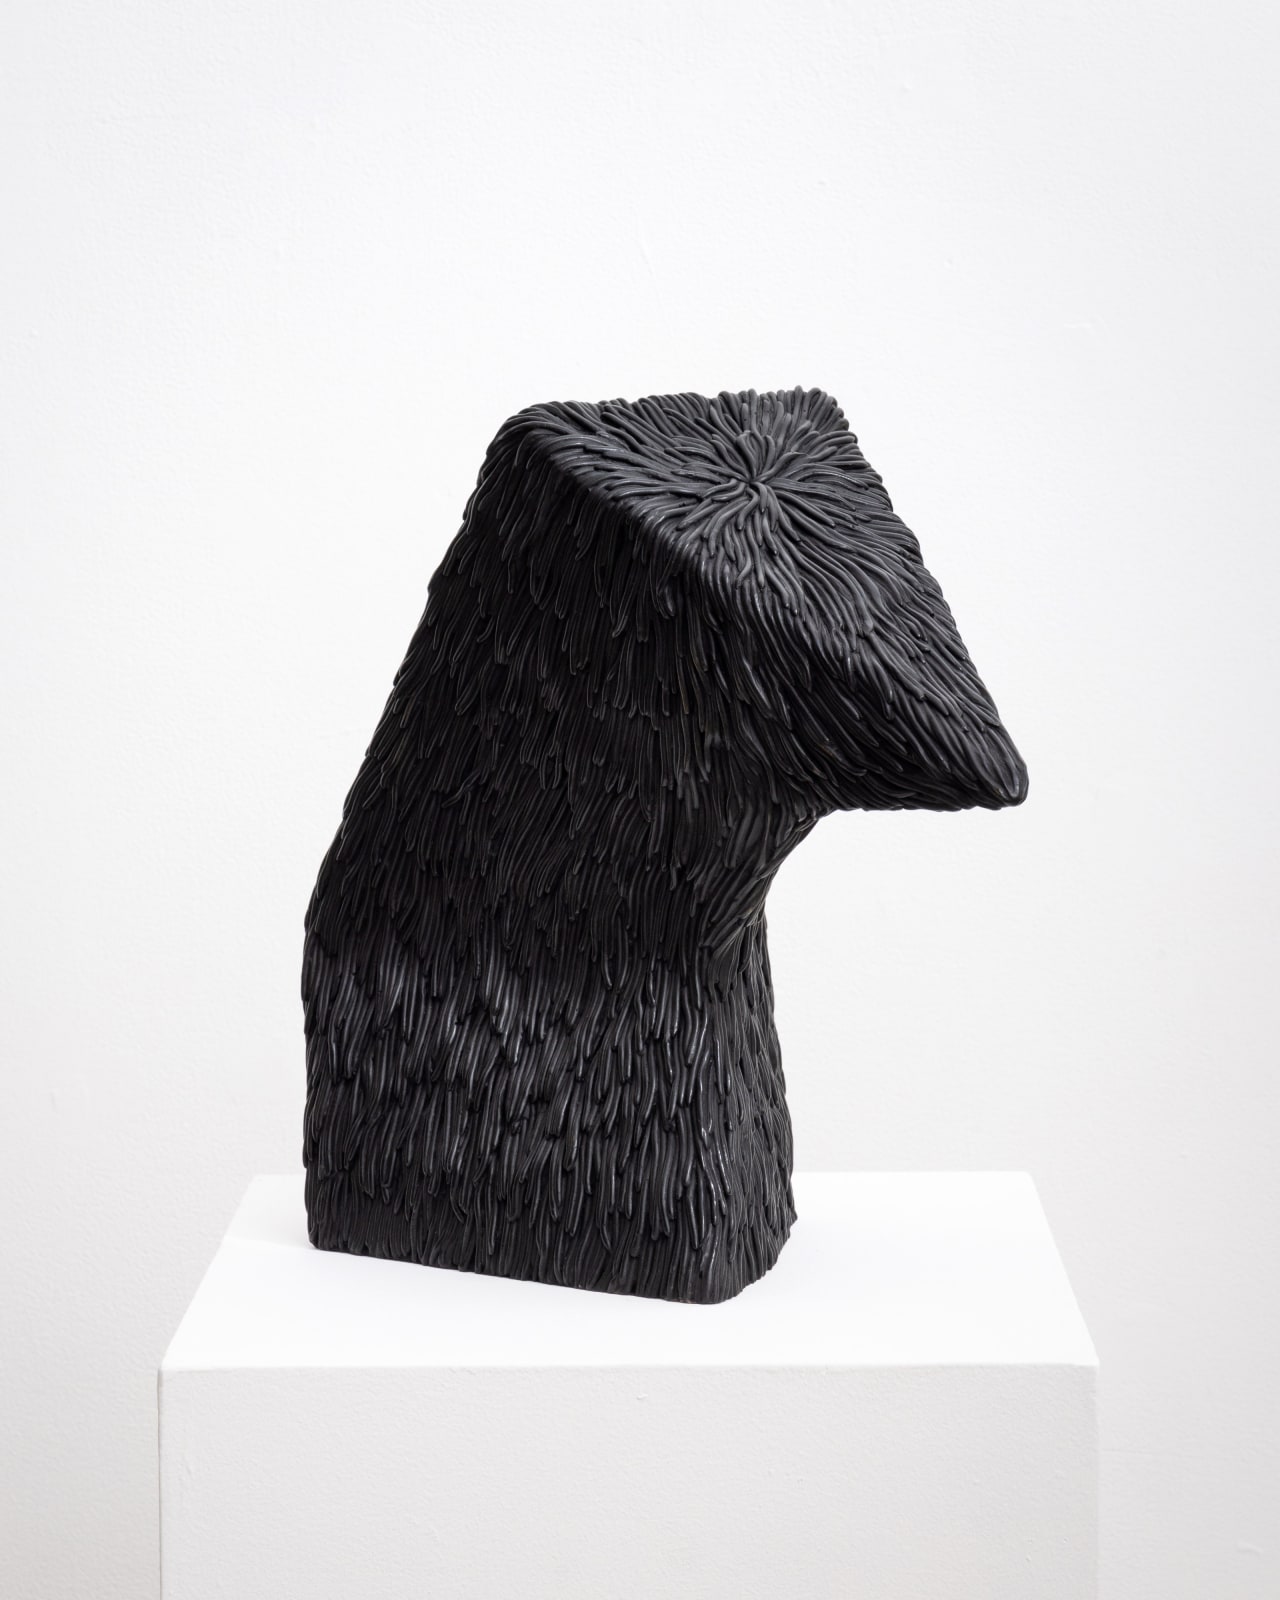 Free-standing bronze sculpture of an abstracted form with a flat triangular head that is bowing down. The sculpture is cast with a surface texture resembling shaggy hair and treated with a black patina. 